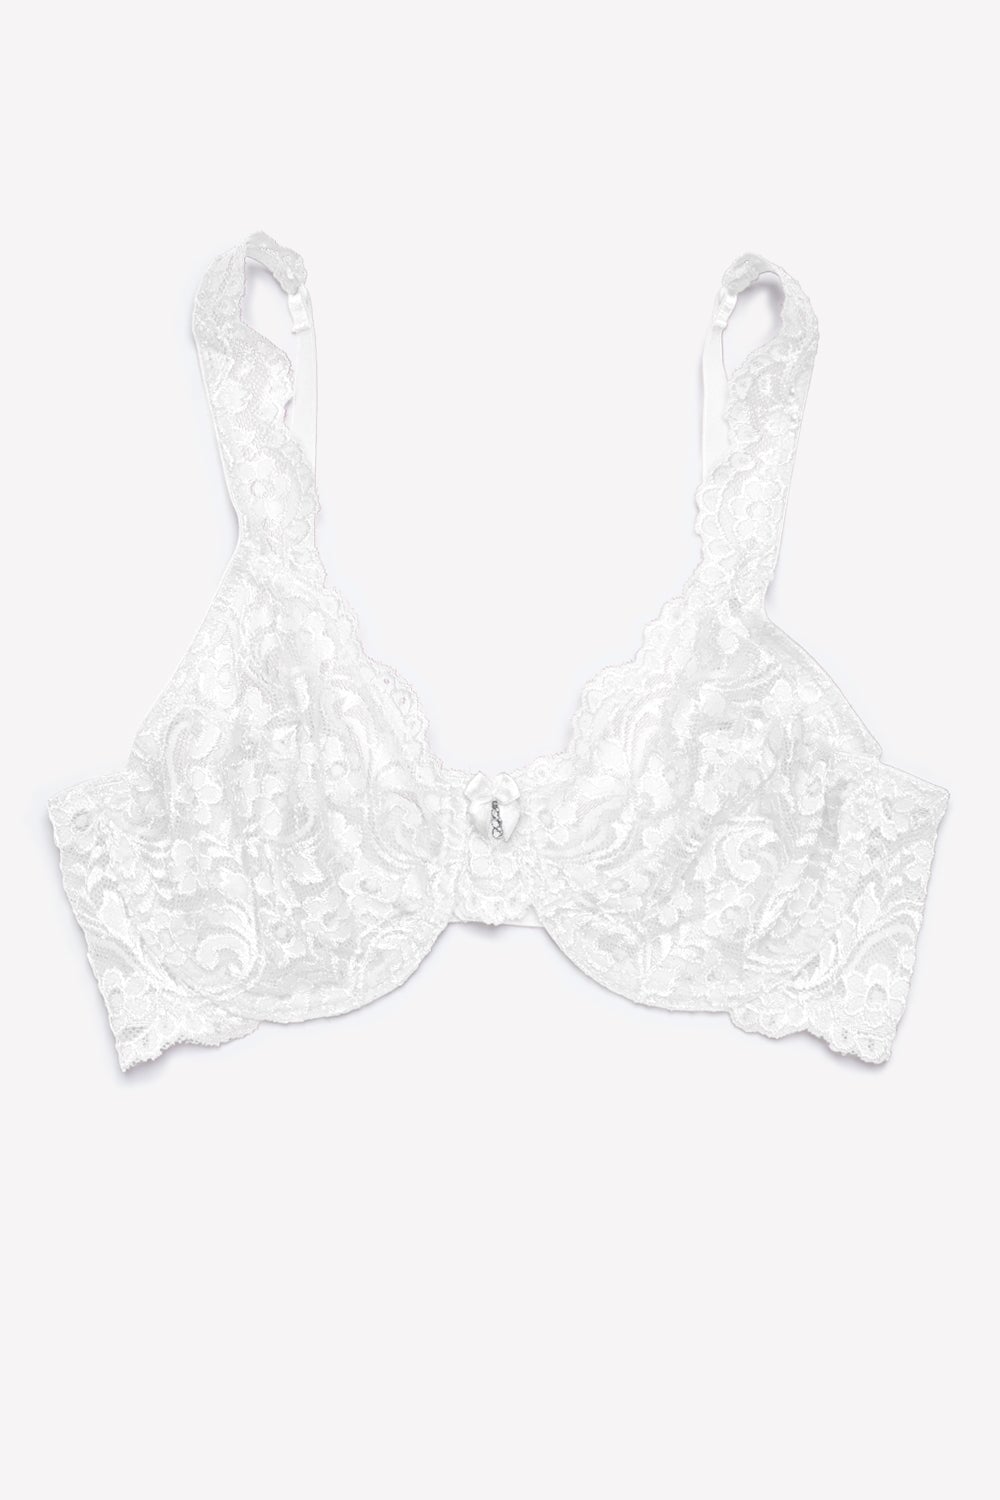 Sexy White Lace Bra Bustier, Lingerie for Woman, Plus Size